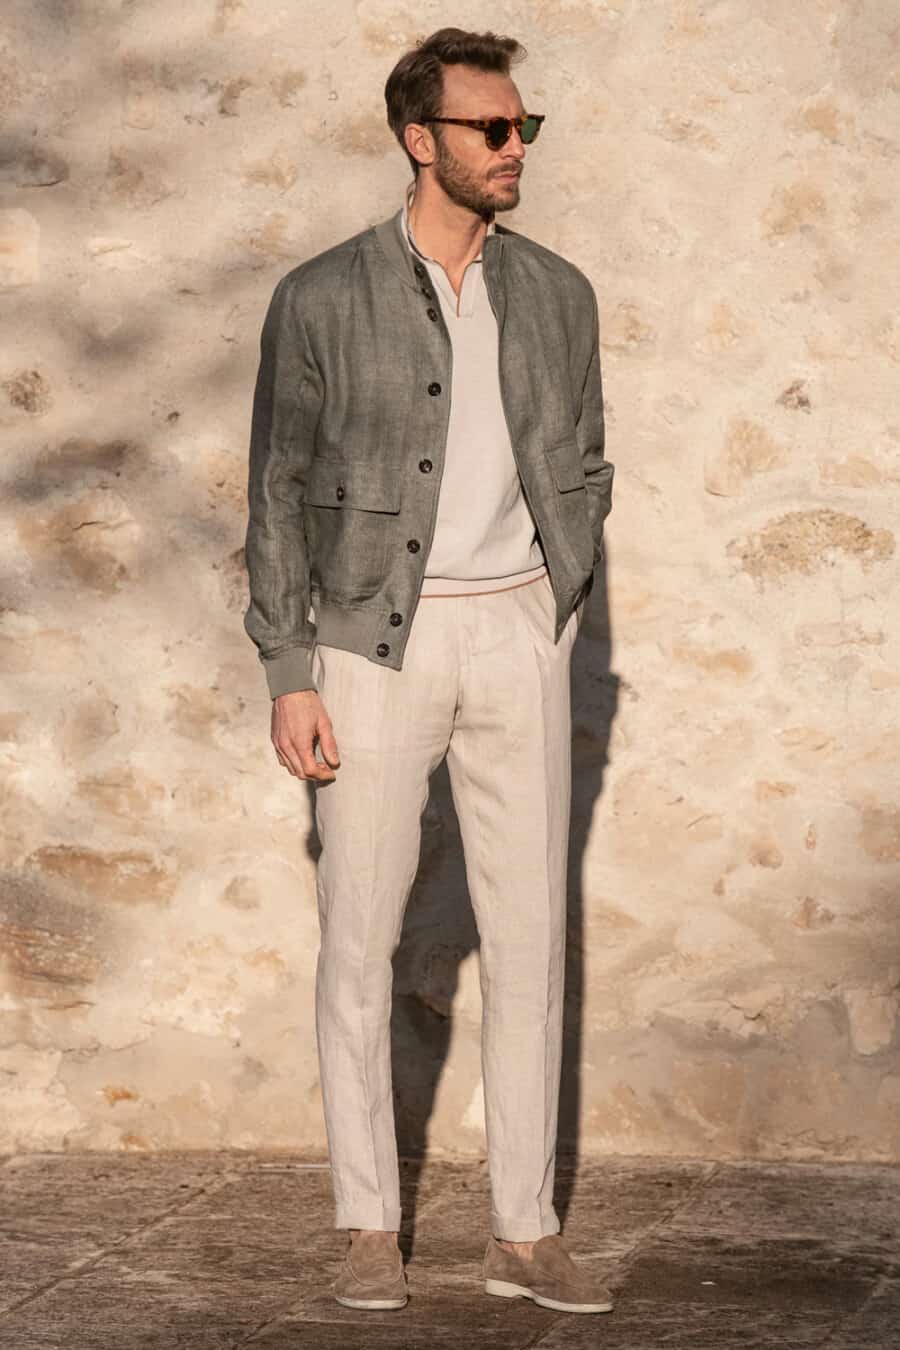 Men's stone linen pants, knitted light grey polo shirt, mid grey linen bomber jacket, tortoiseshell sunglasses and taupe suede loafers outfit